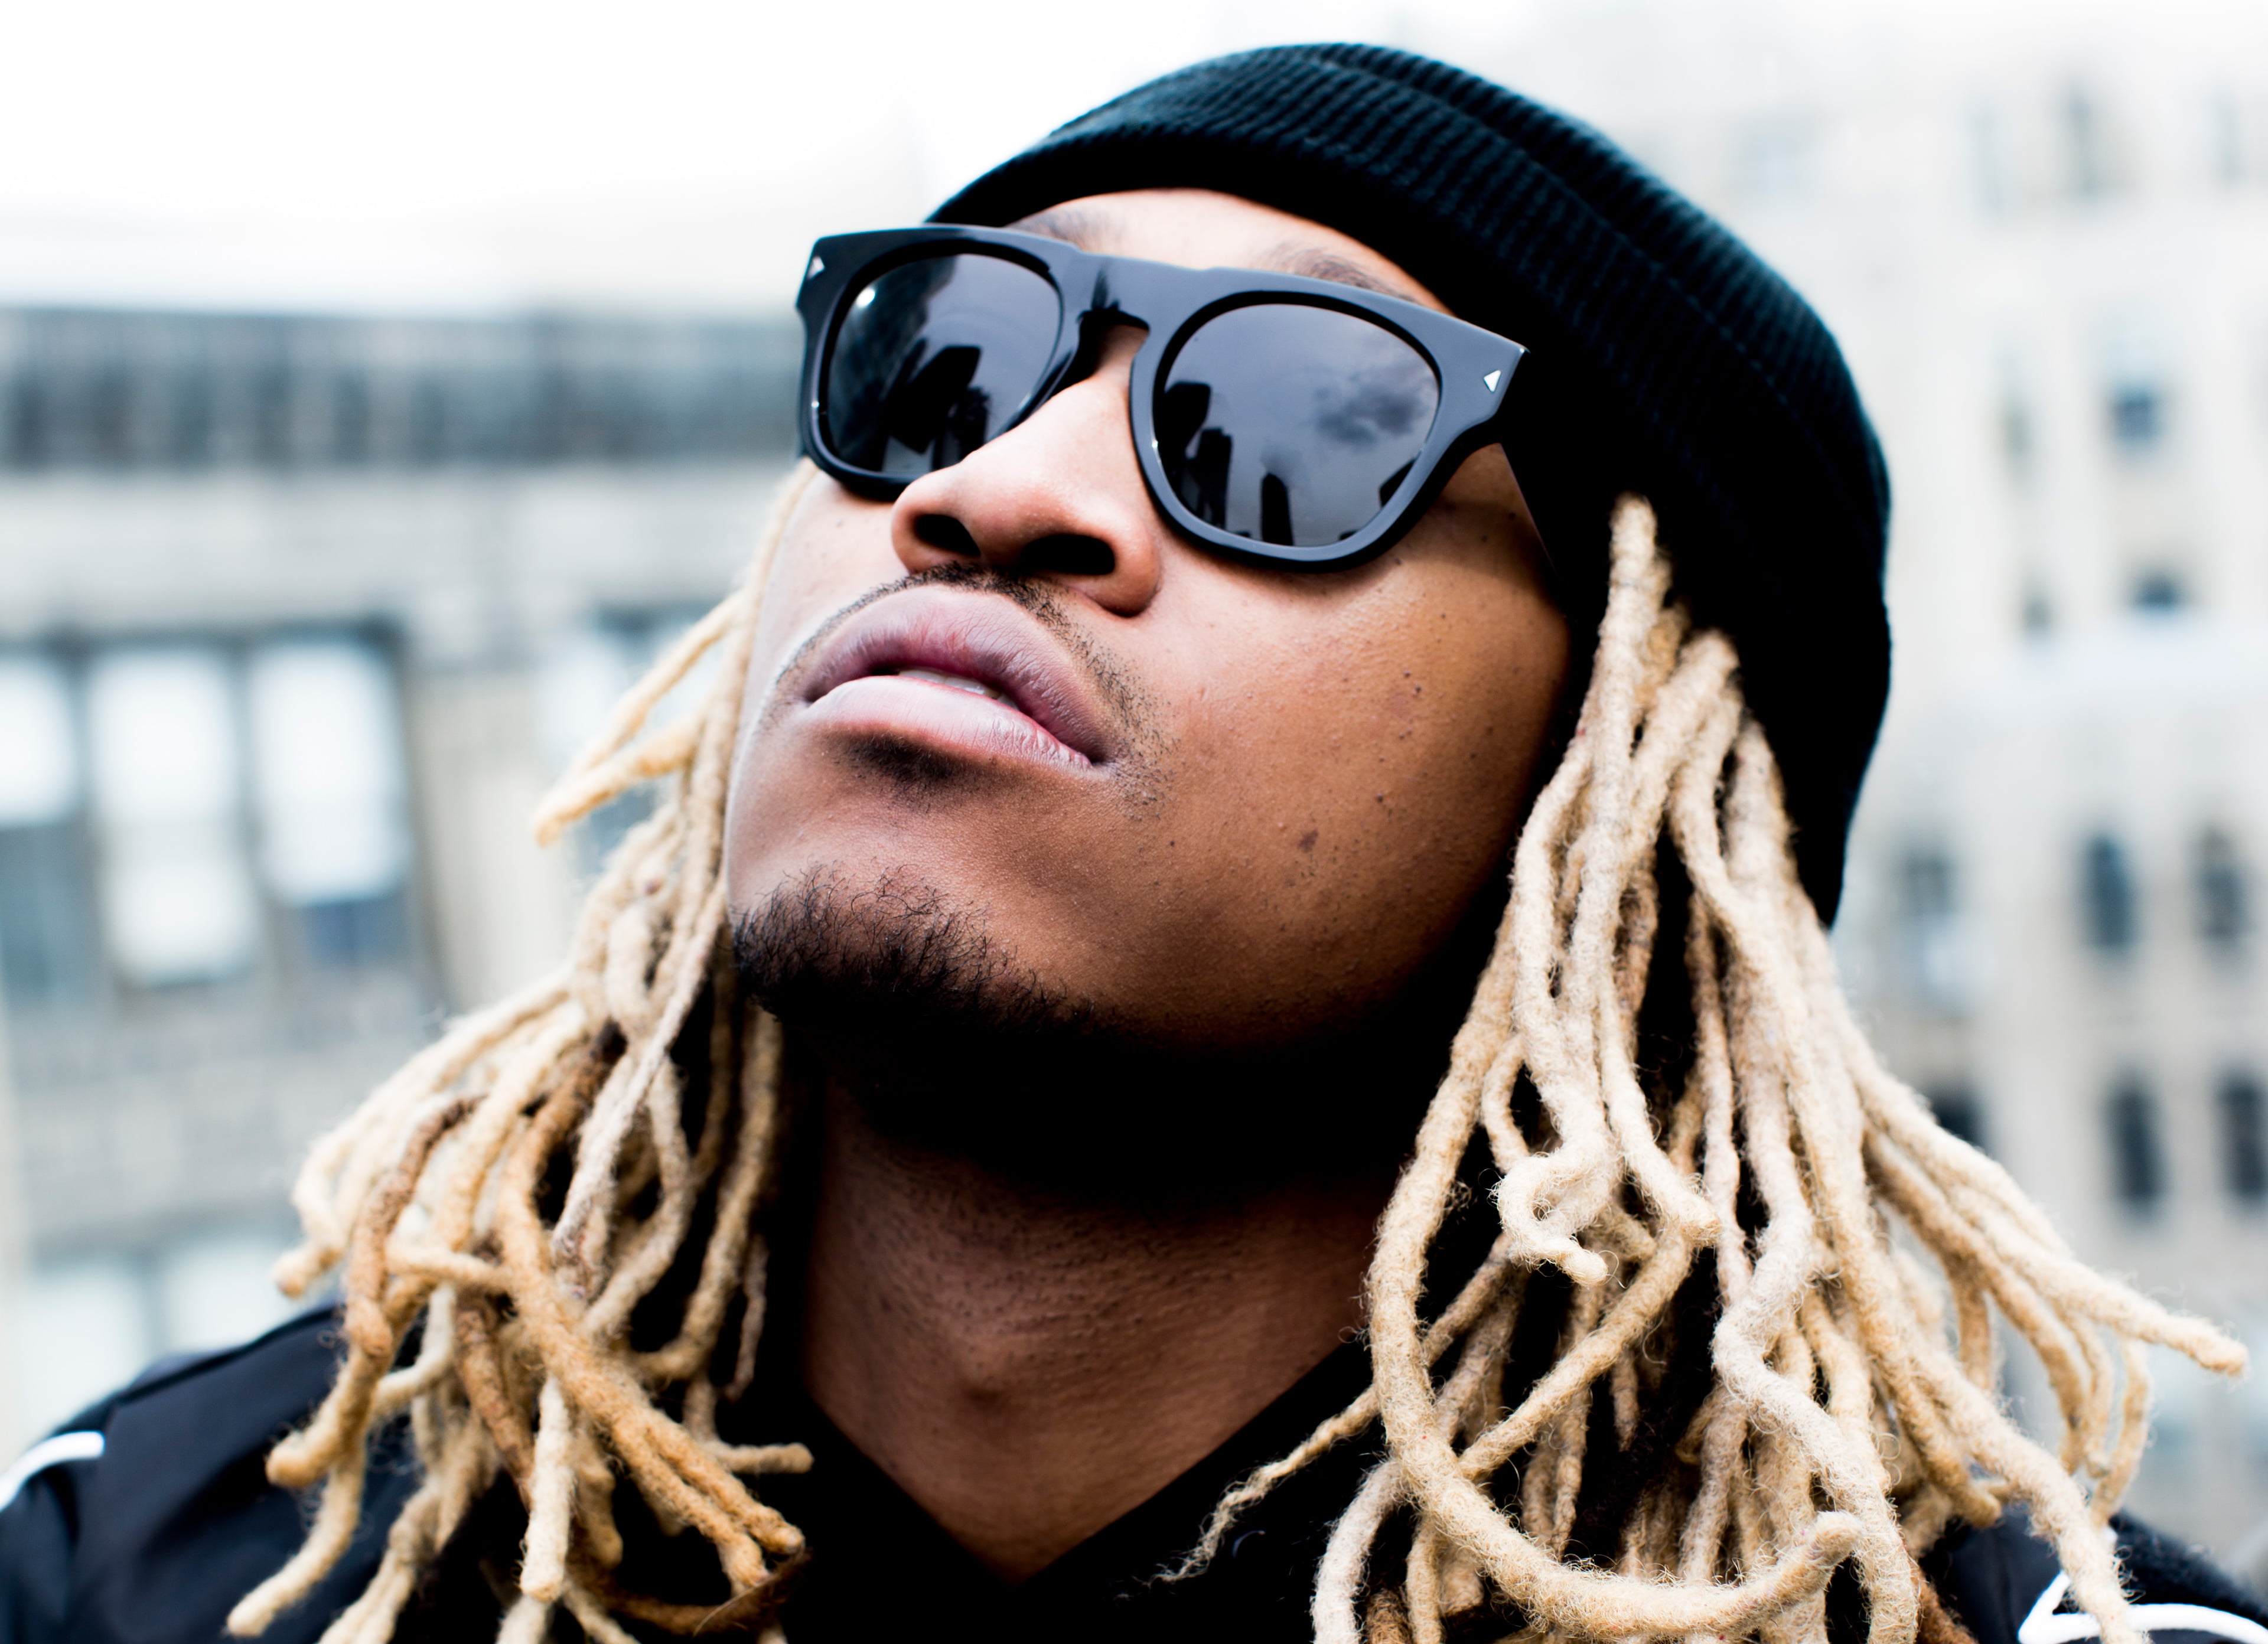 Man With Blonde Dreadlocks Wearing Sunglasses And Knitted